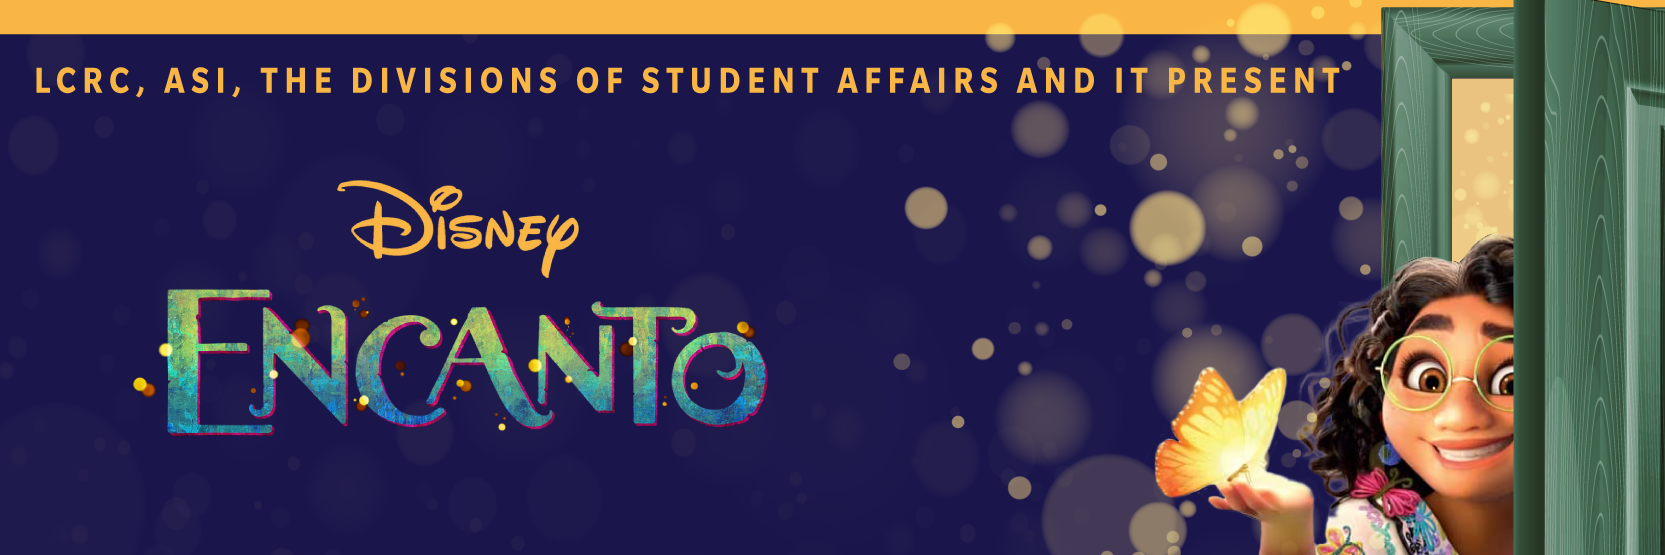 LCRC, ASI, the Divisions of Student Affairs and IT present Disney Encanto